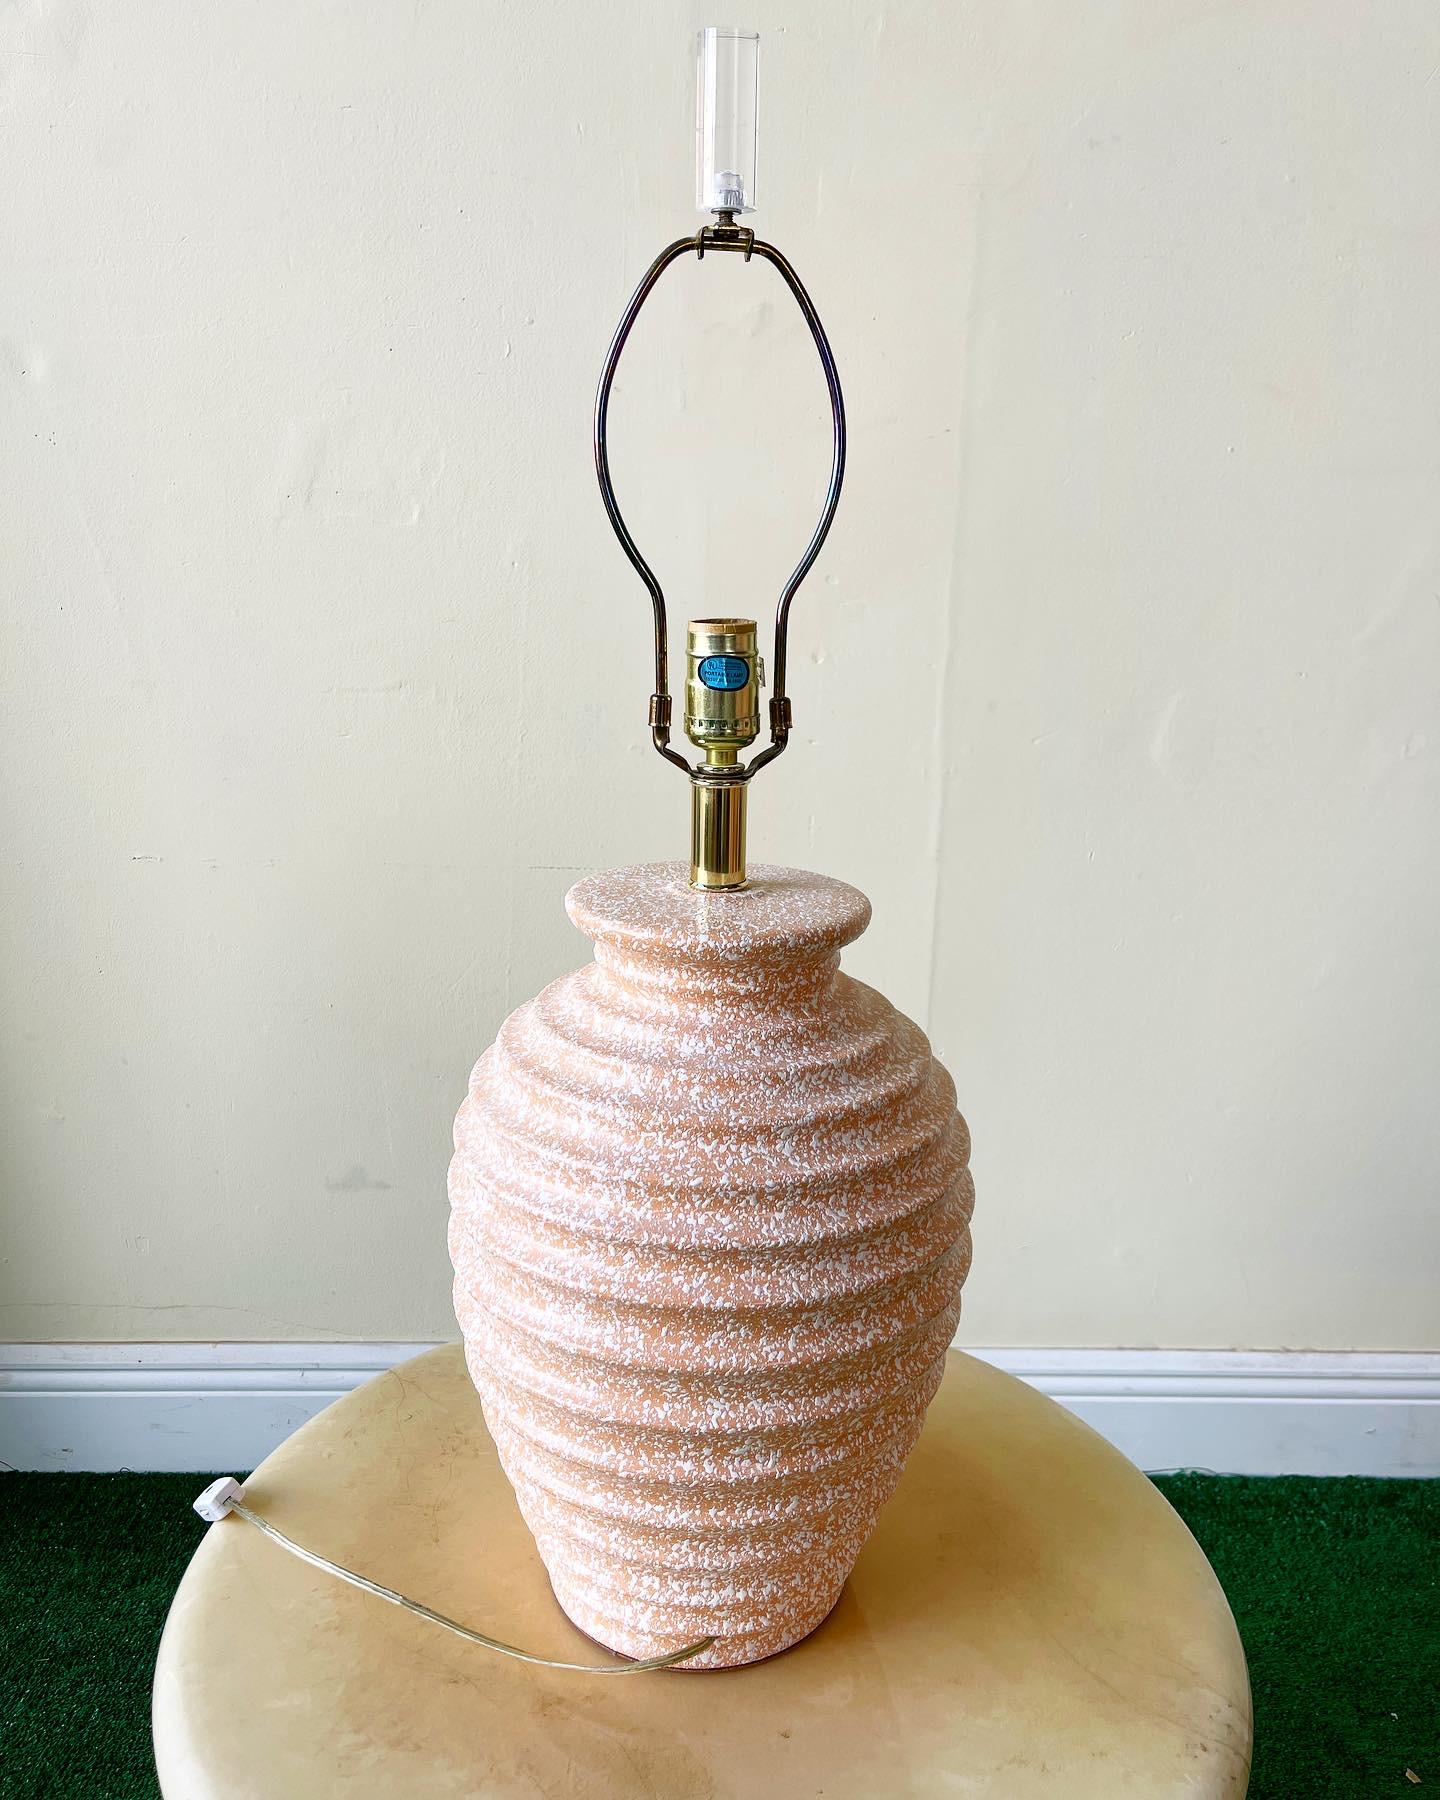 Unique orange and white speckled table lamp. Features ridges wrapping around the body of the lamp from the bottom to the top.